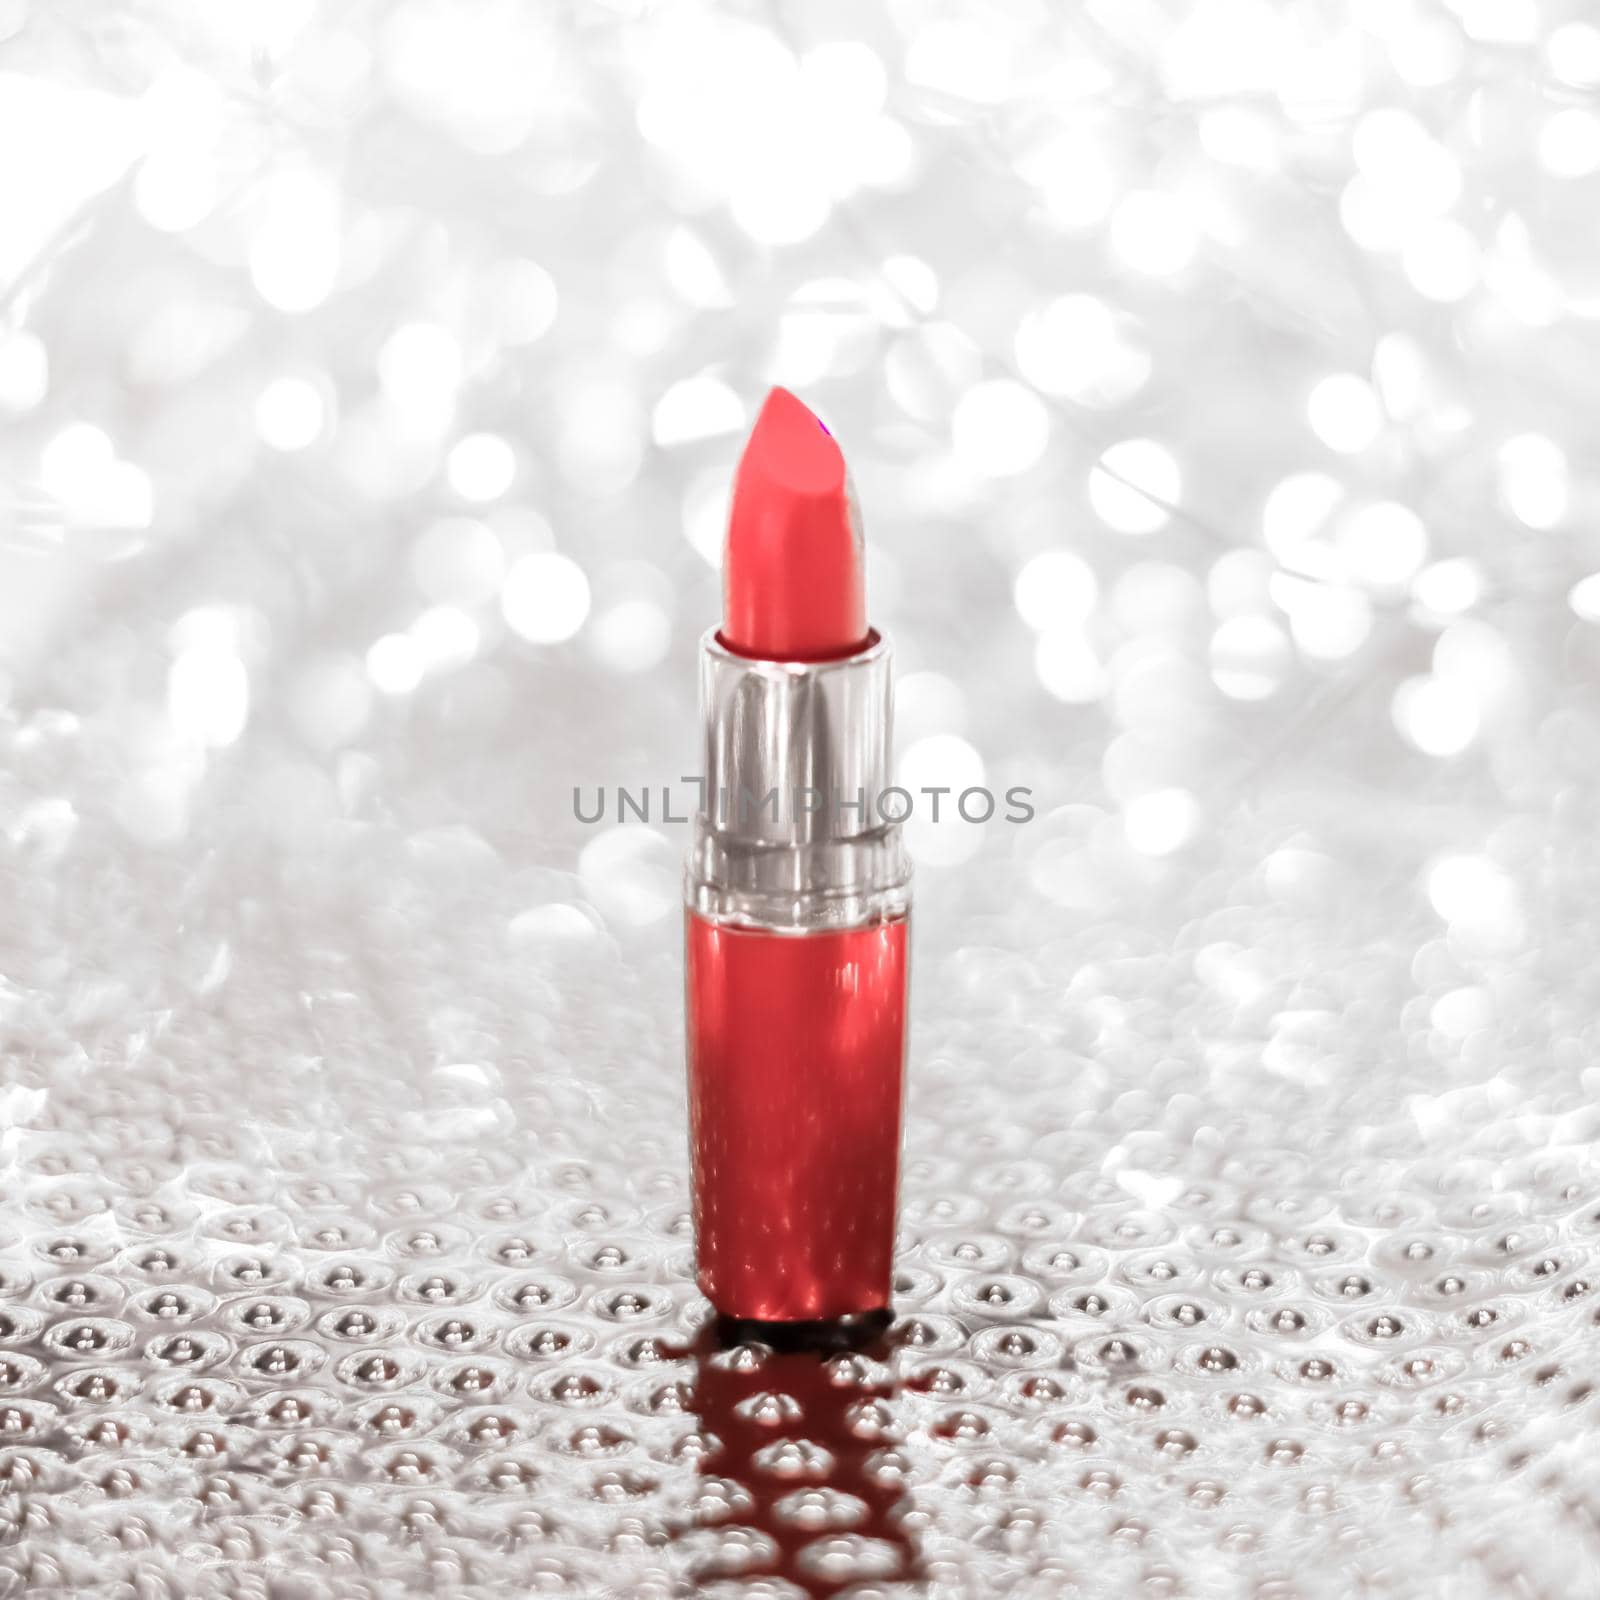 Coral lipstick on silver Christmas, New Years and Valentines Day holiday glitter background, make-up and cosmetics product for luxury beauty brand by Anneleven